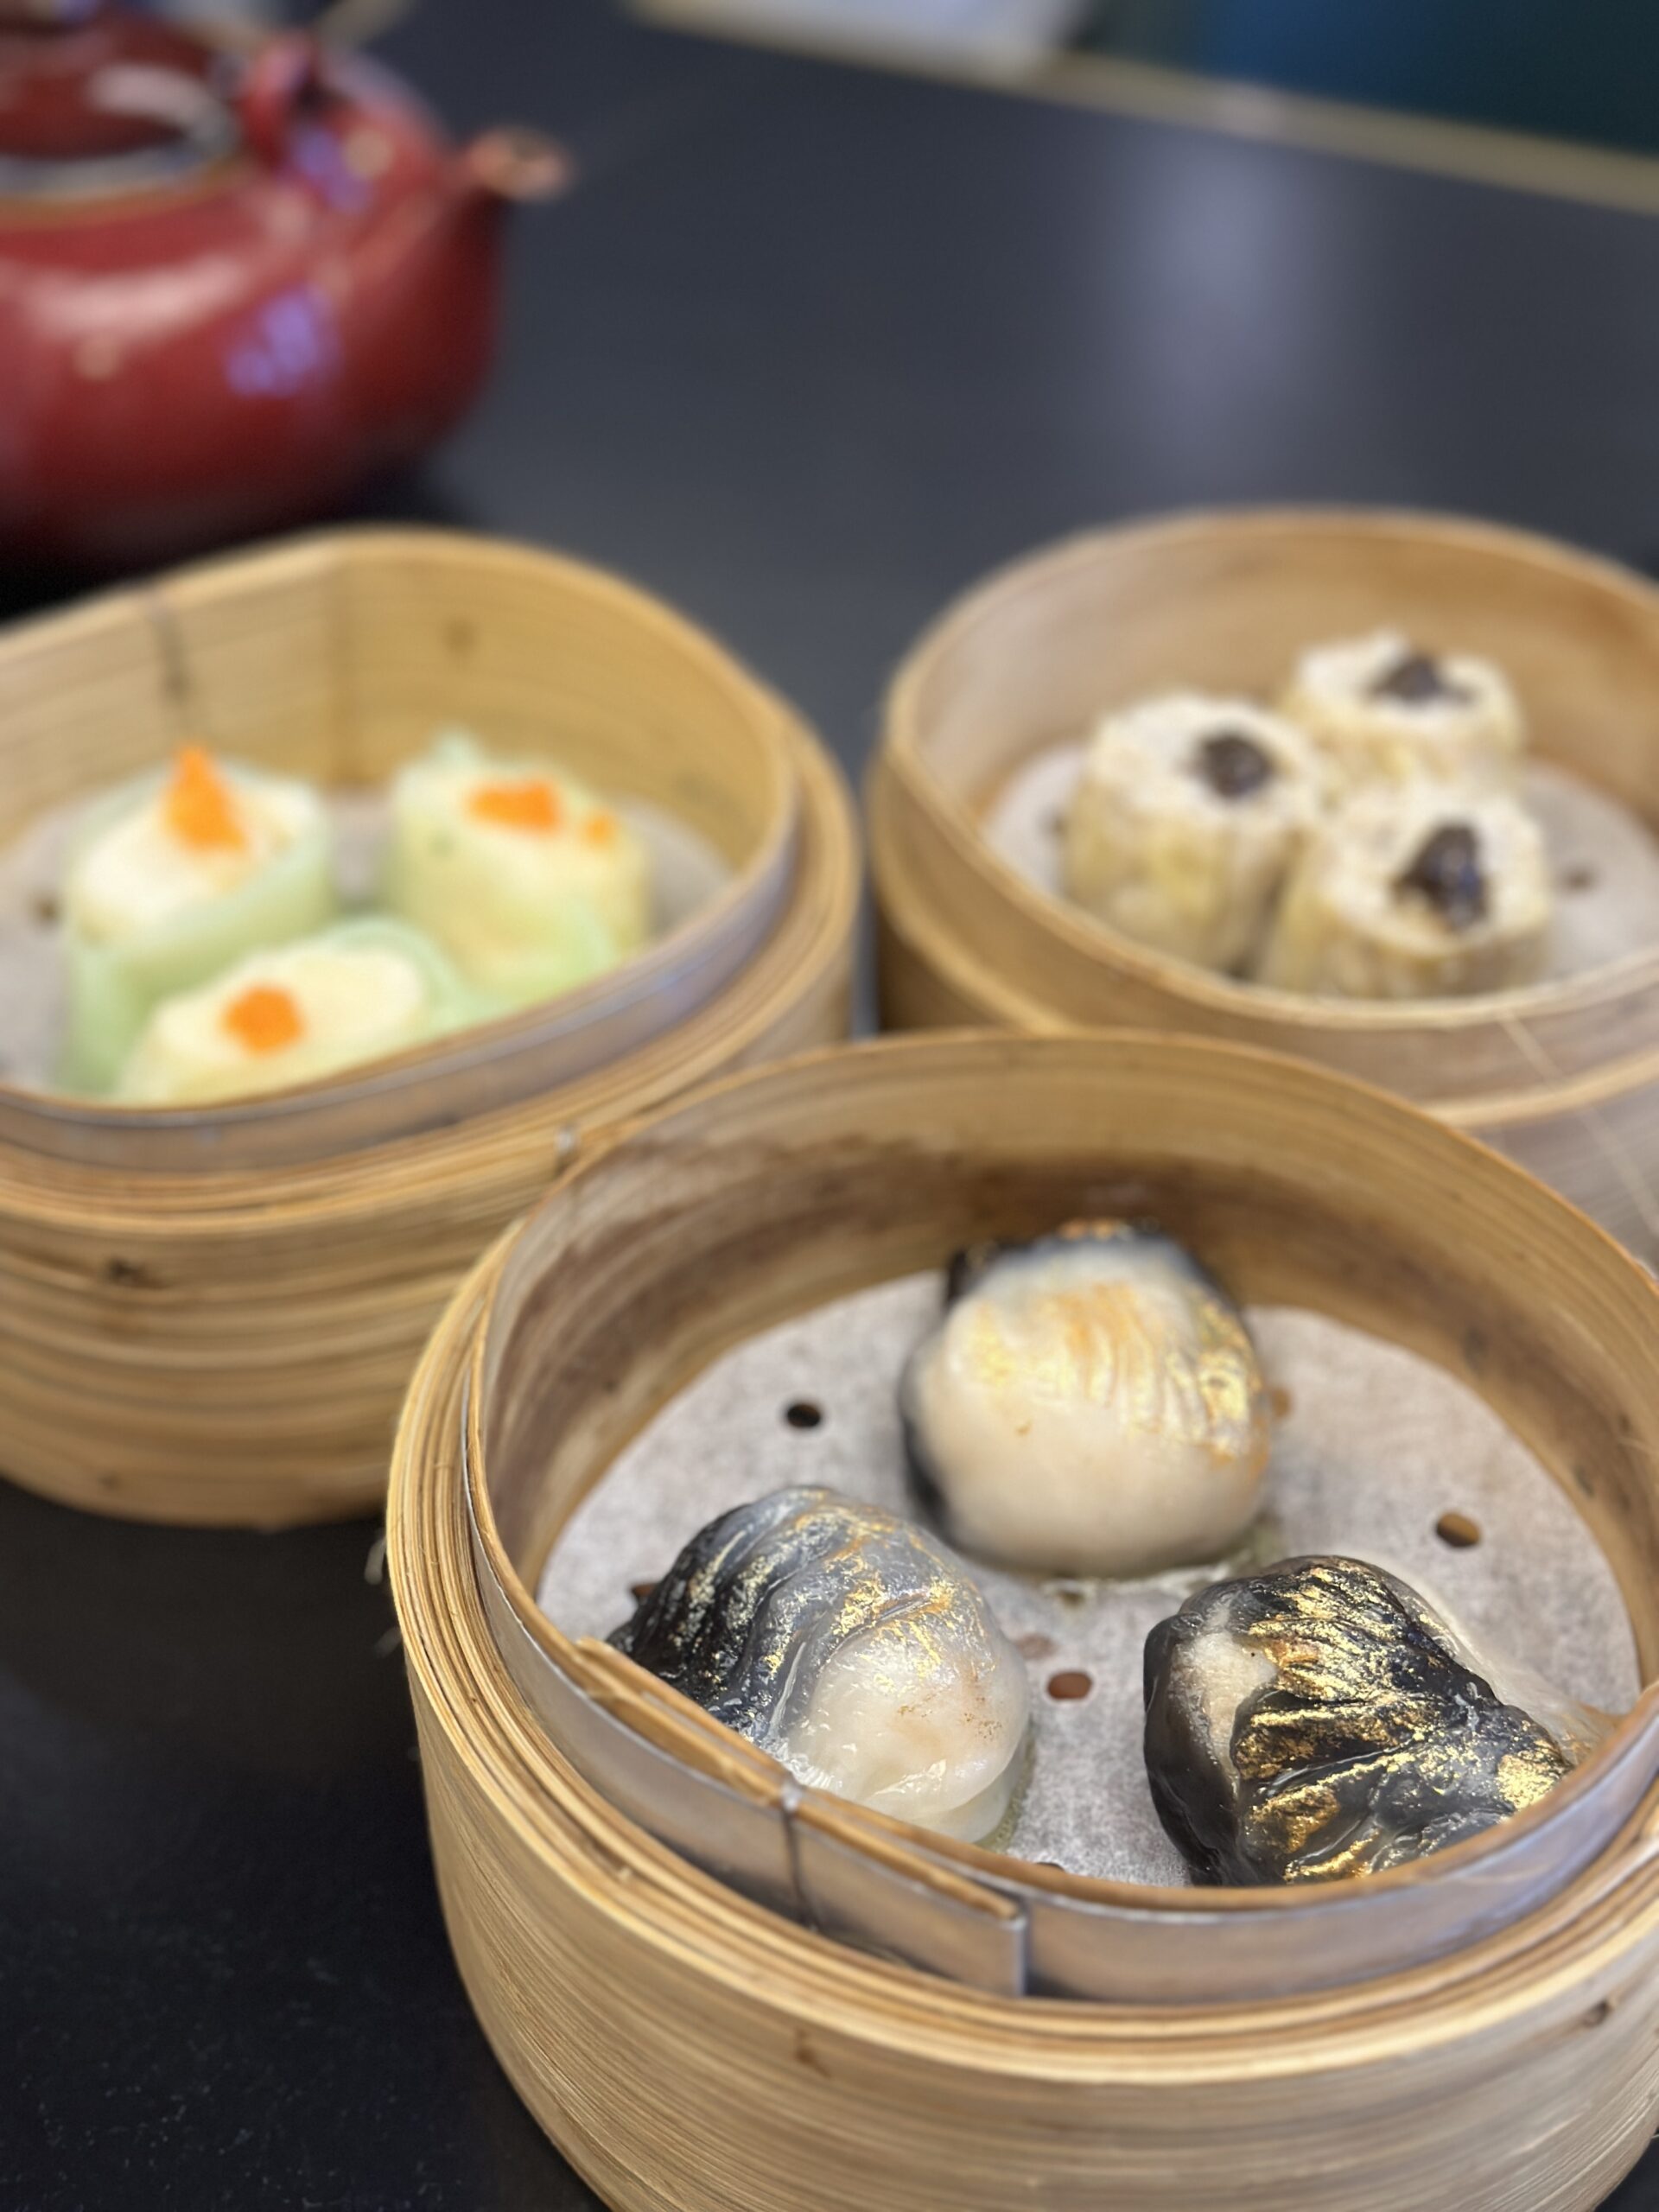 The qing steamed dim sum